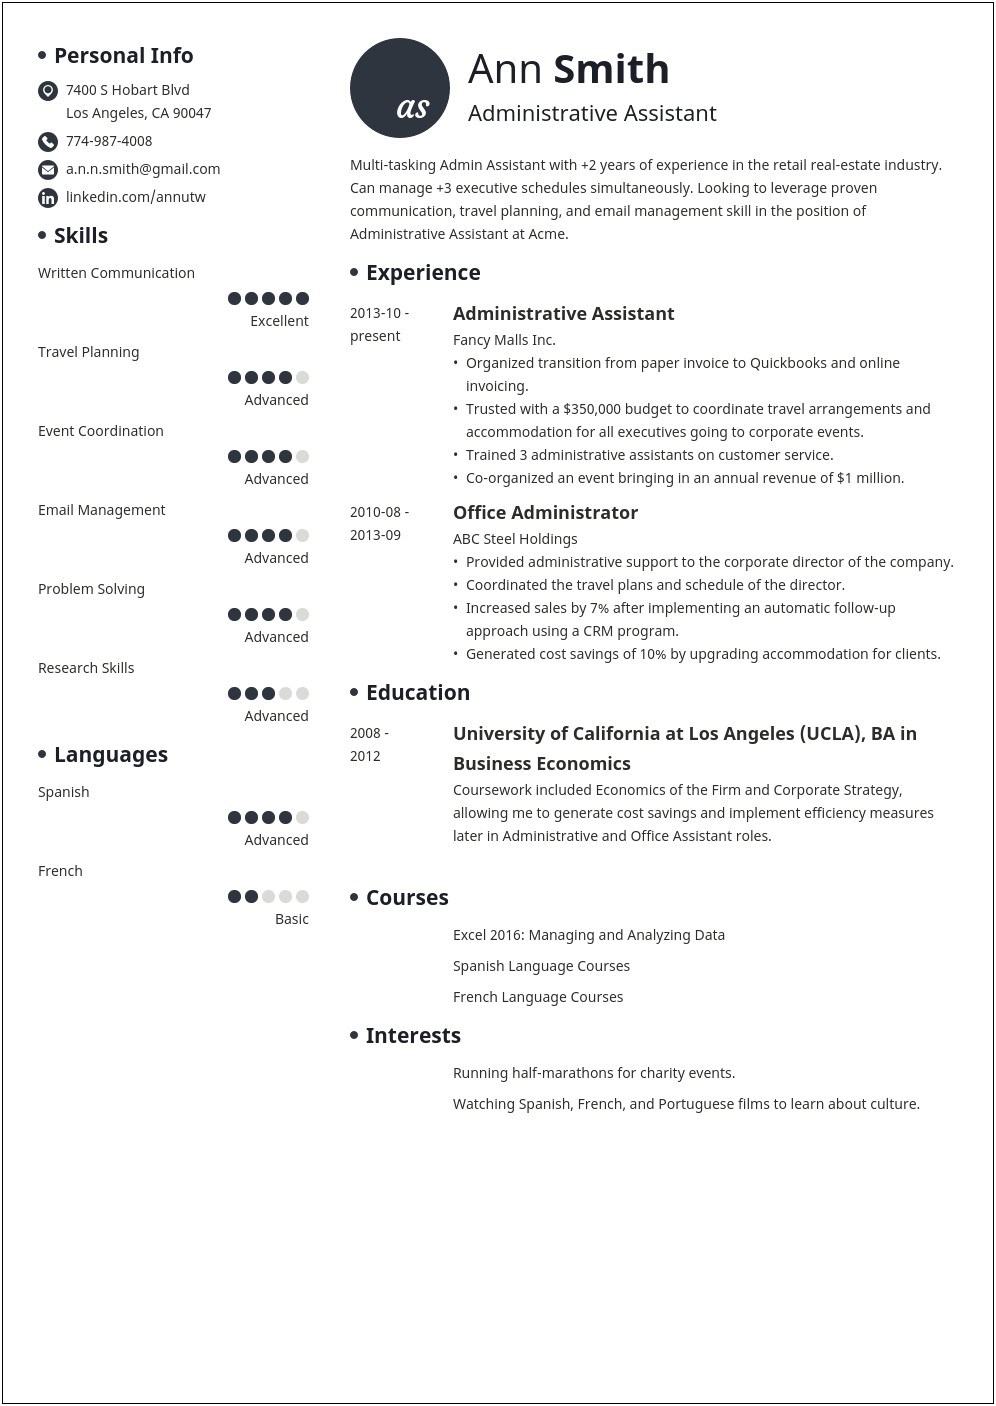 Best Administrative Assistant Resume 2014